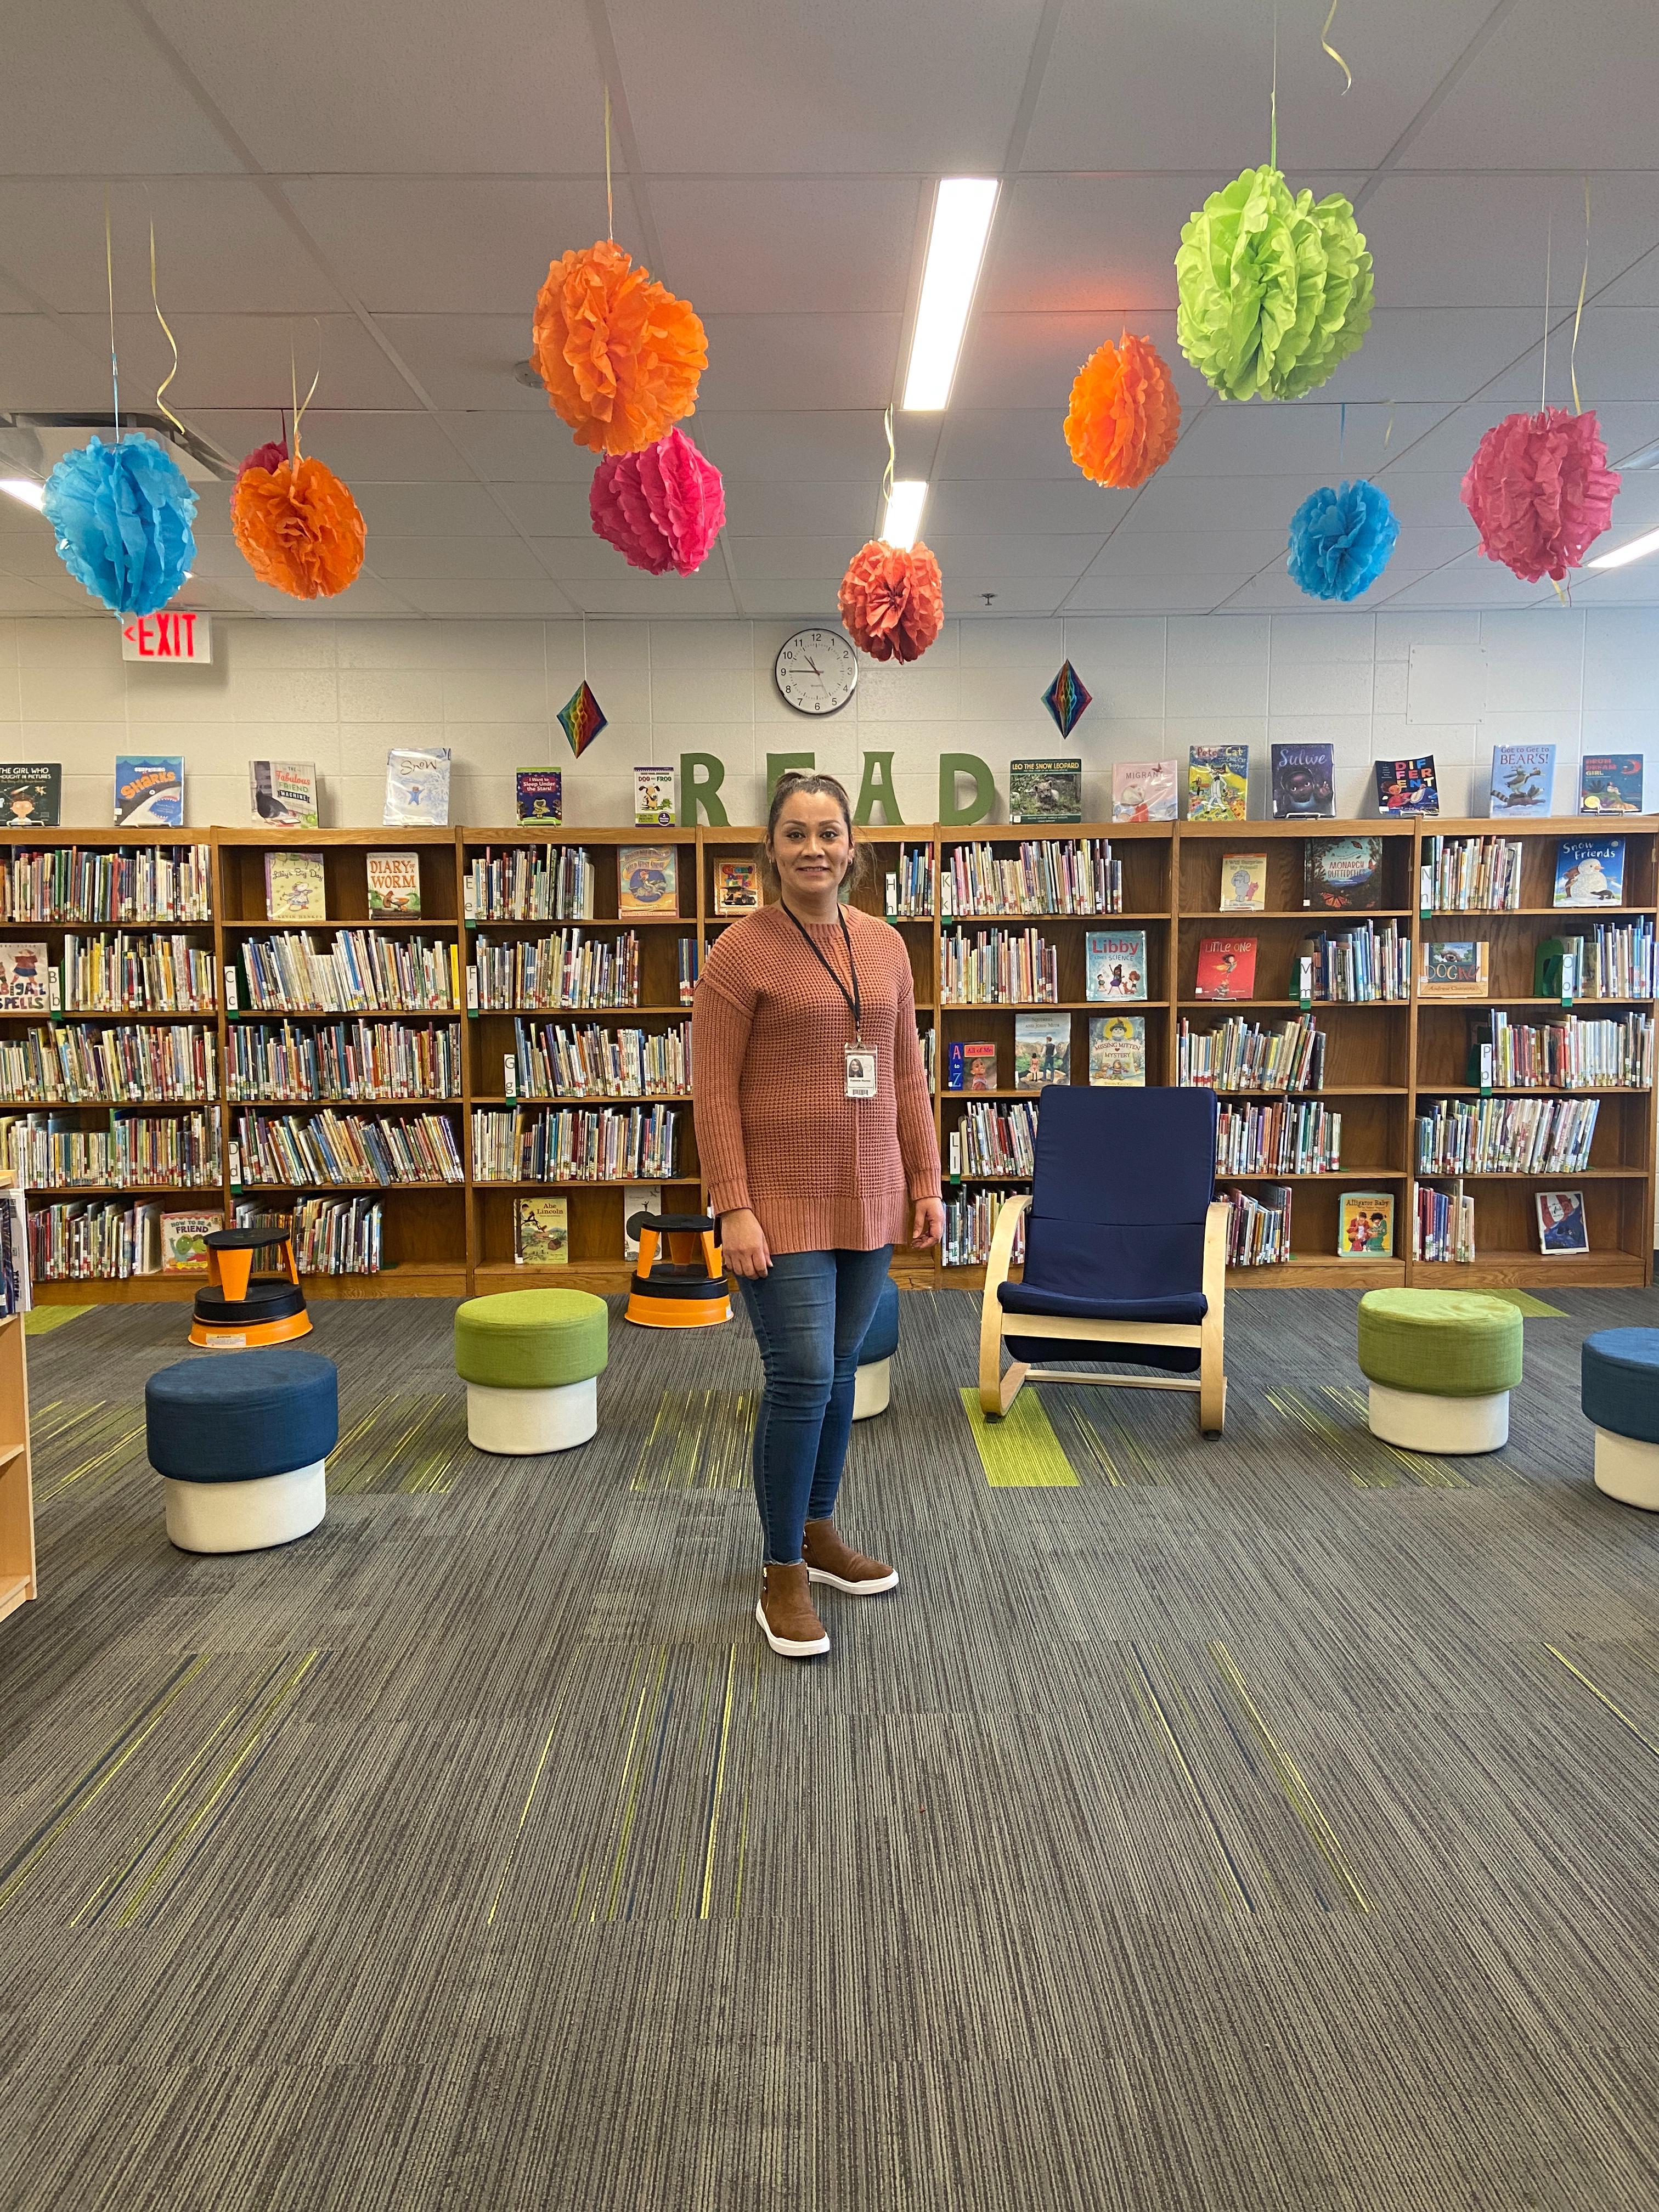 Mrs. Fabiola Nuñez, the Digital Learning Specialist, standing in the library